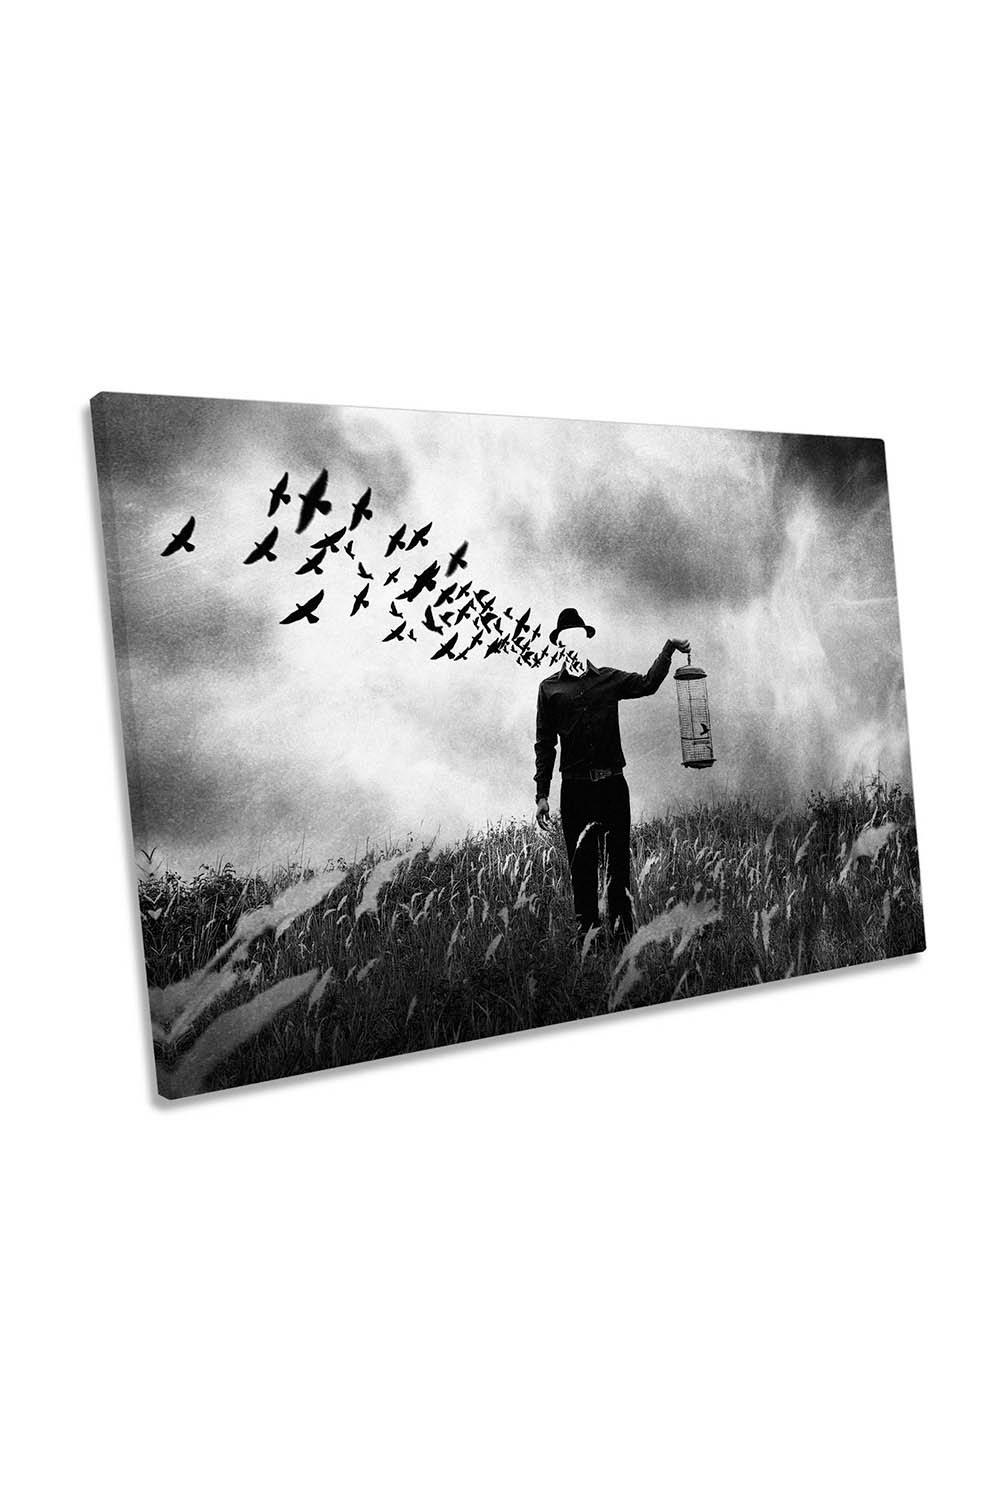 Freedom Birds Released Canvas Wall Art Picture Print